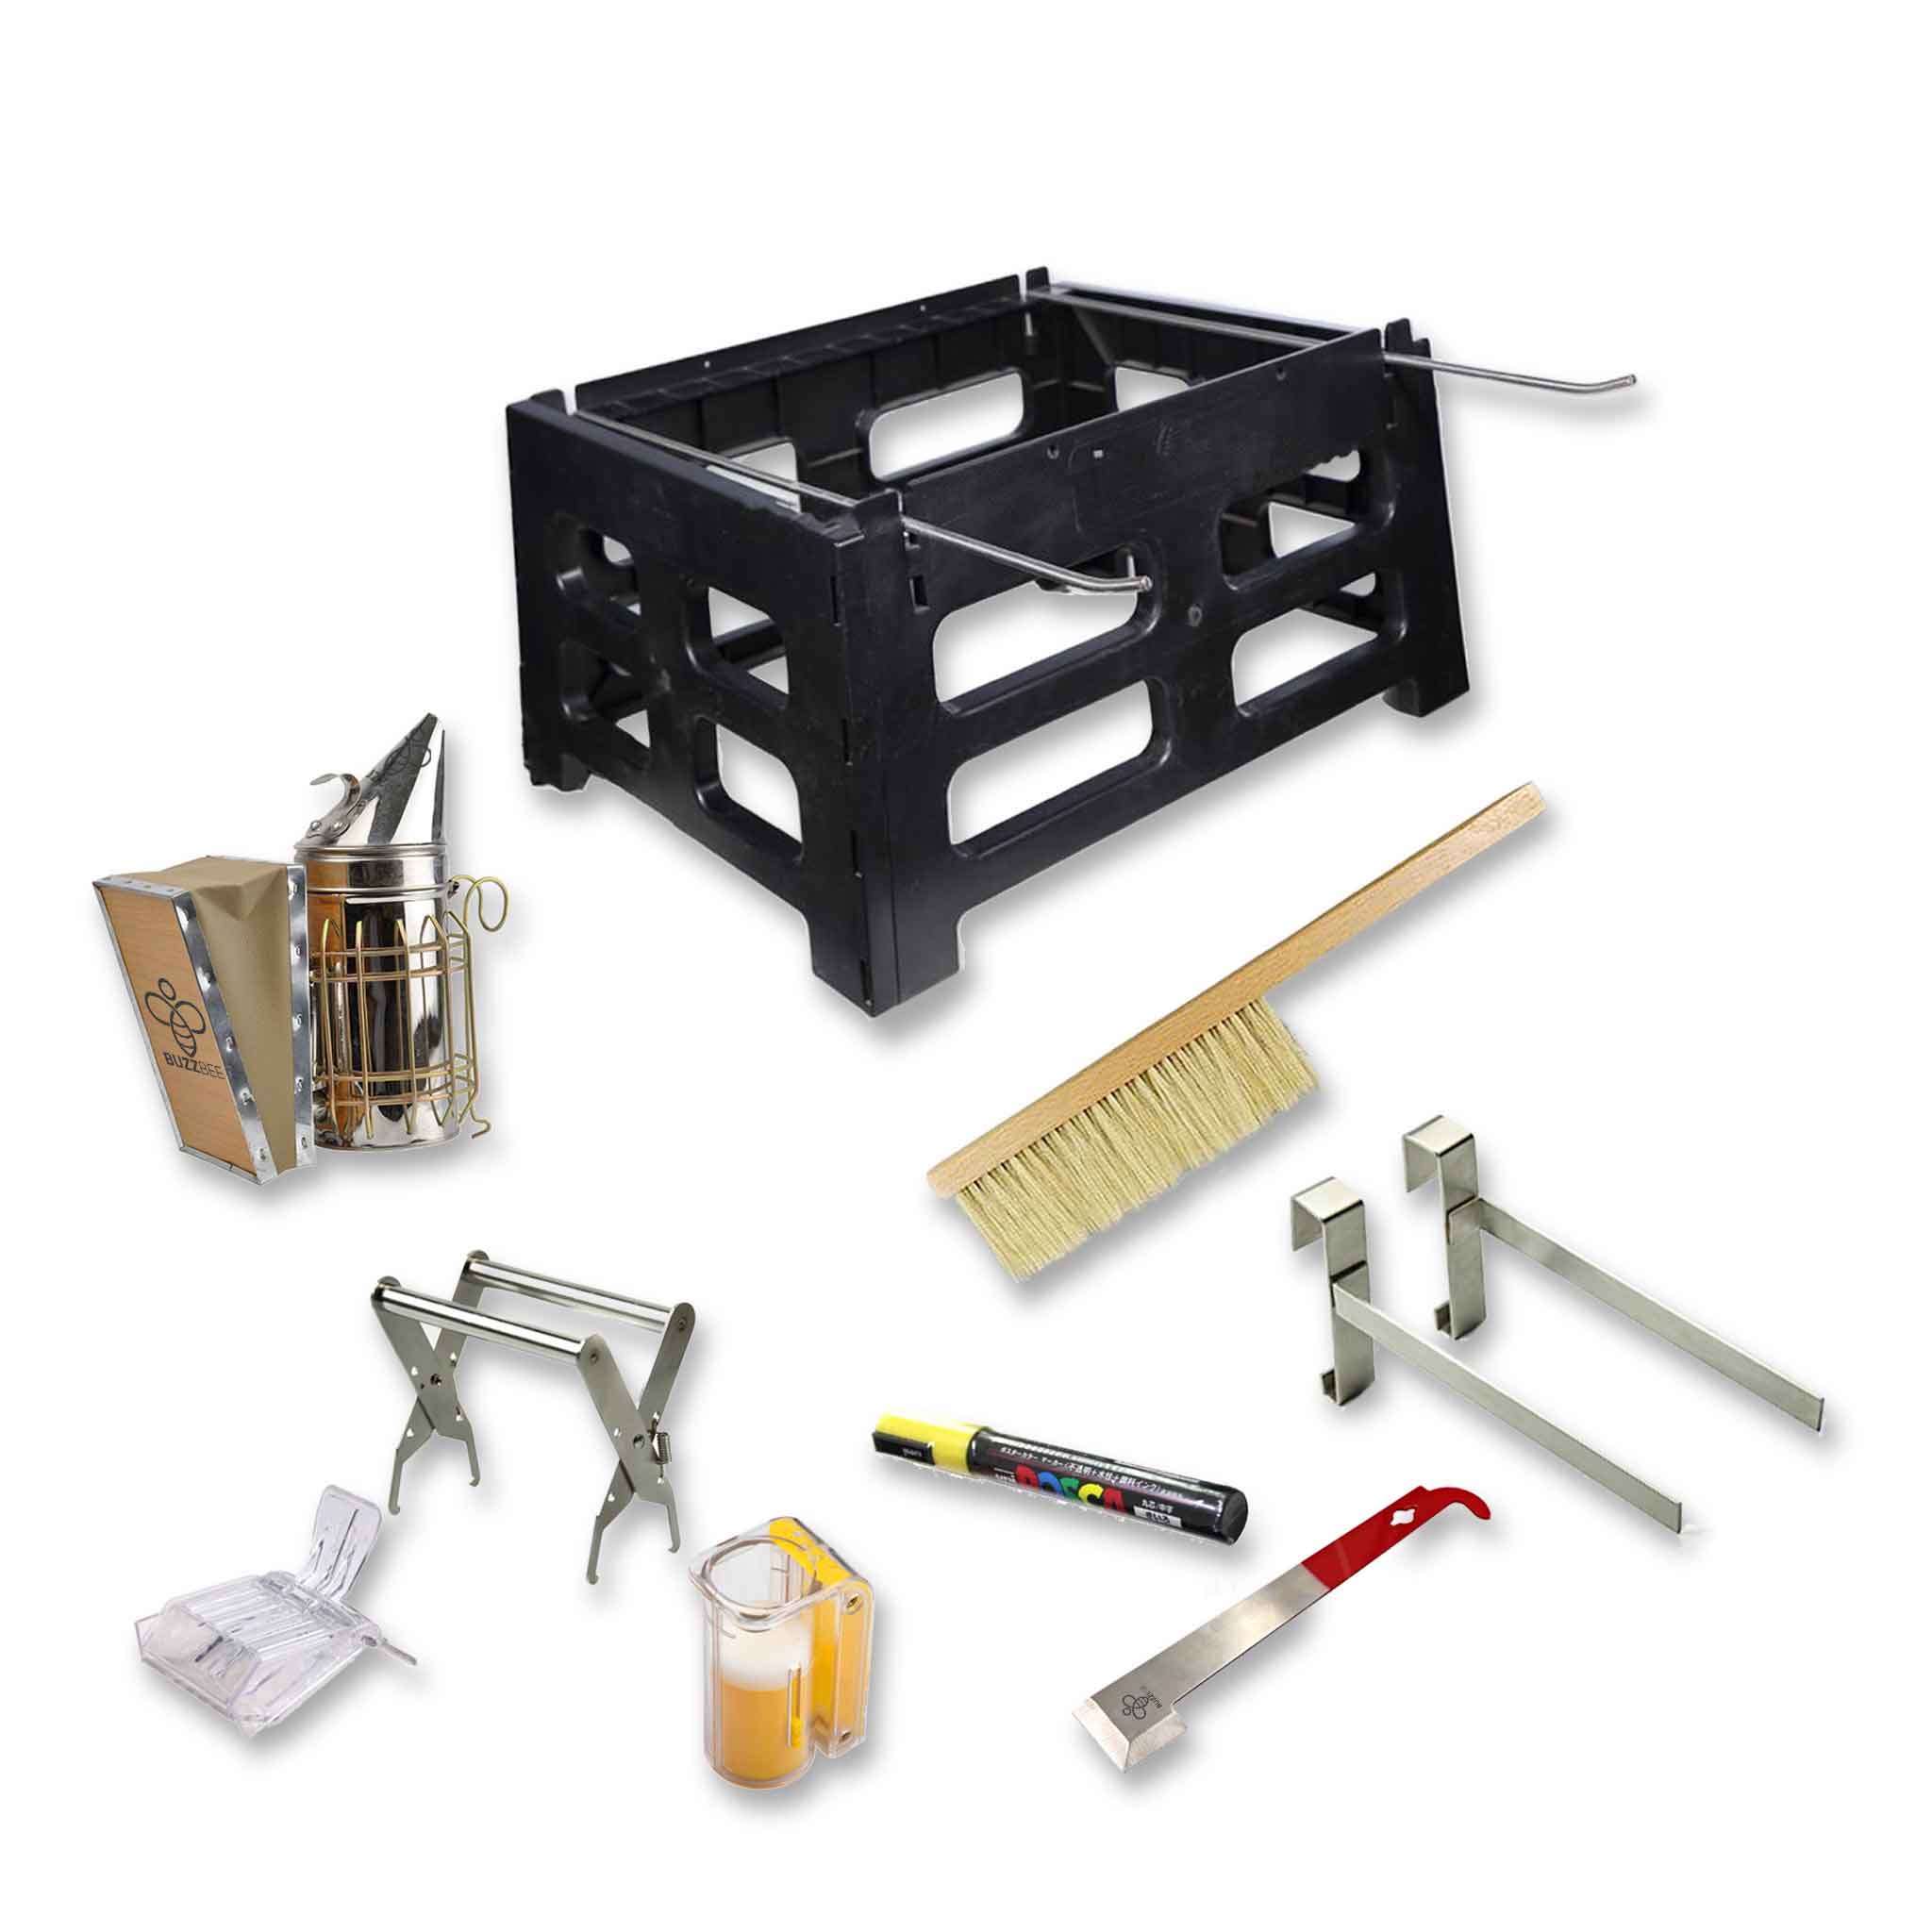 Beekeeping Starter Accessories Kits -  collection by Buzzbee Beekeeping Supplies